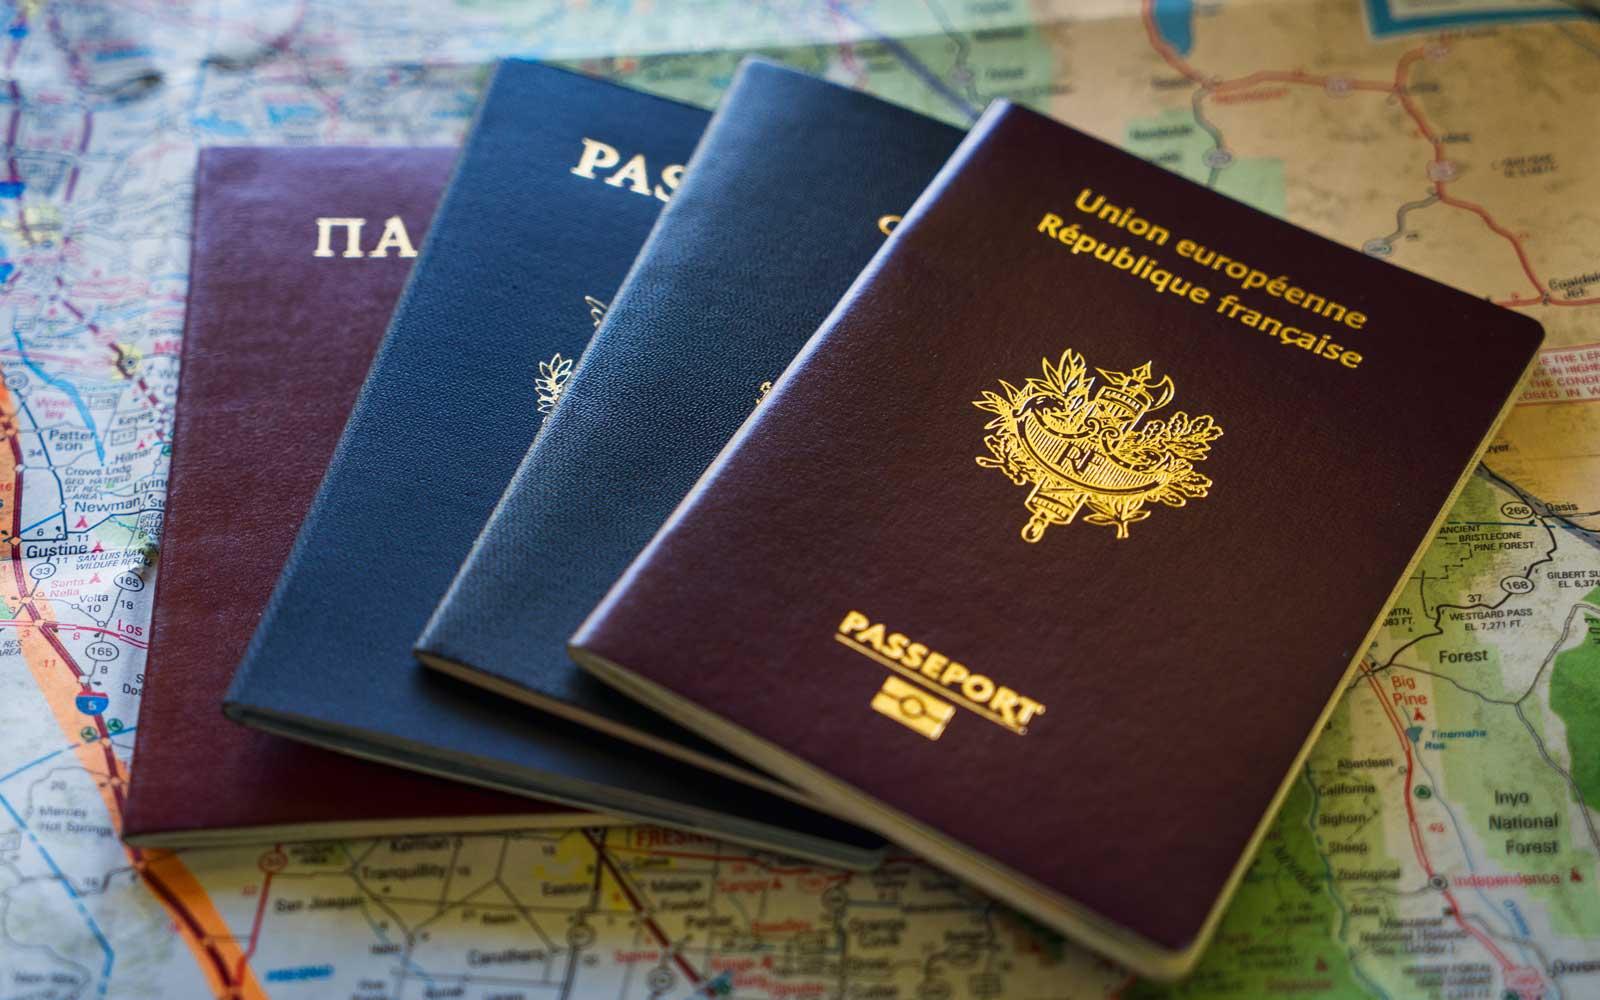 This Passport Is Now the World’s Most Powerful